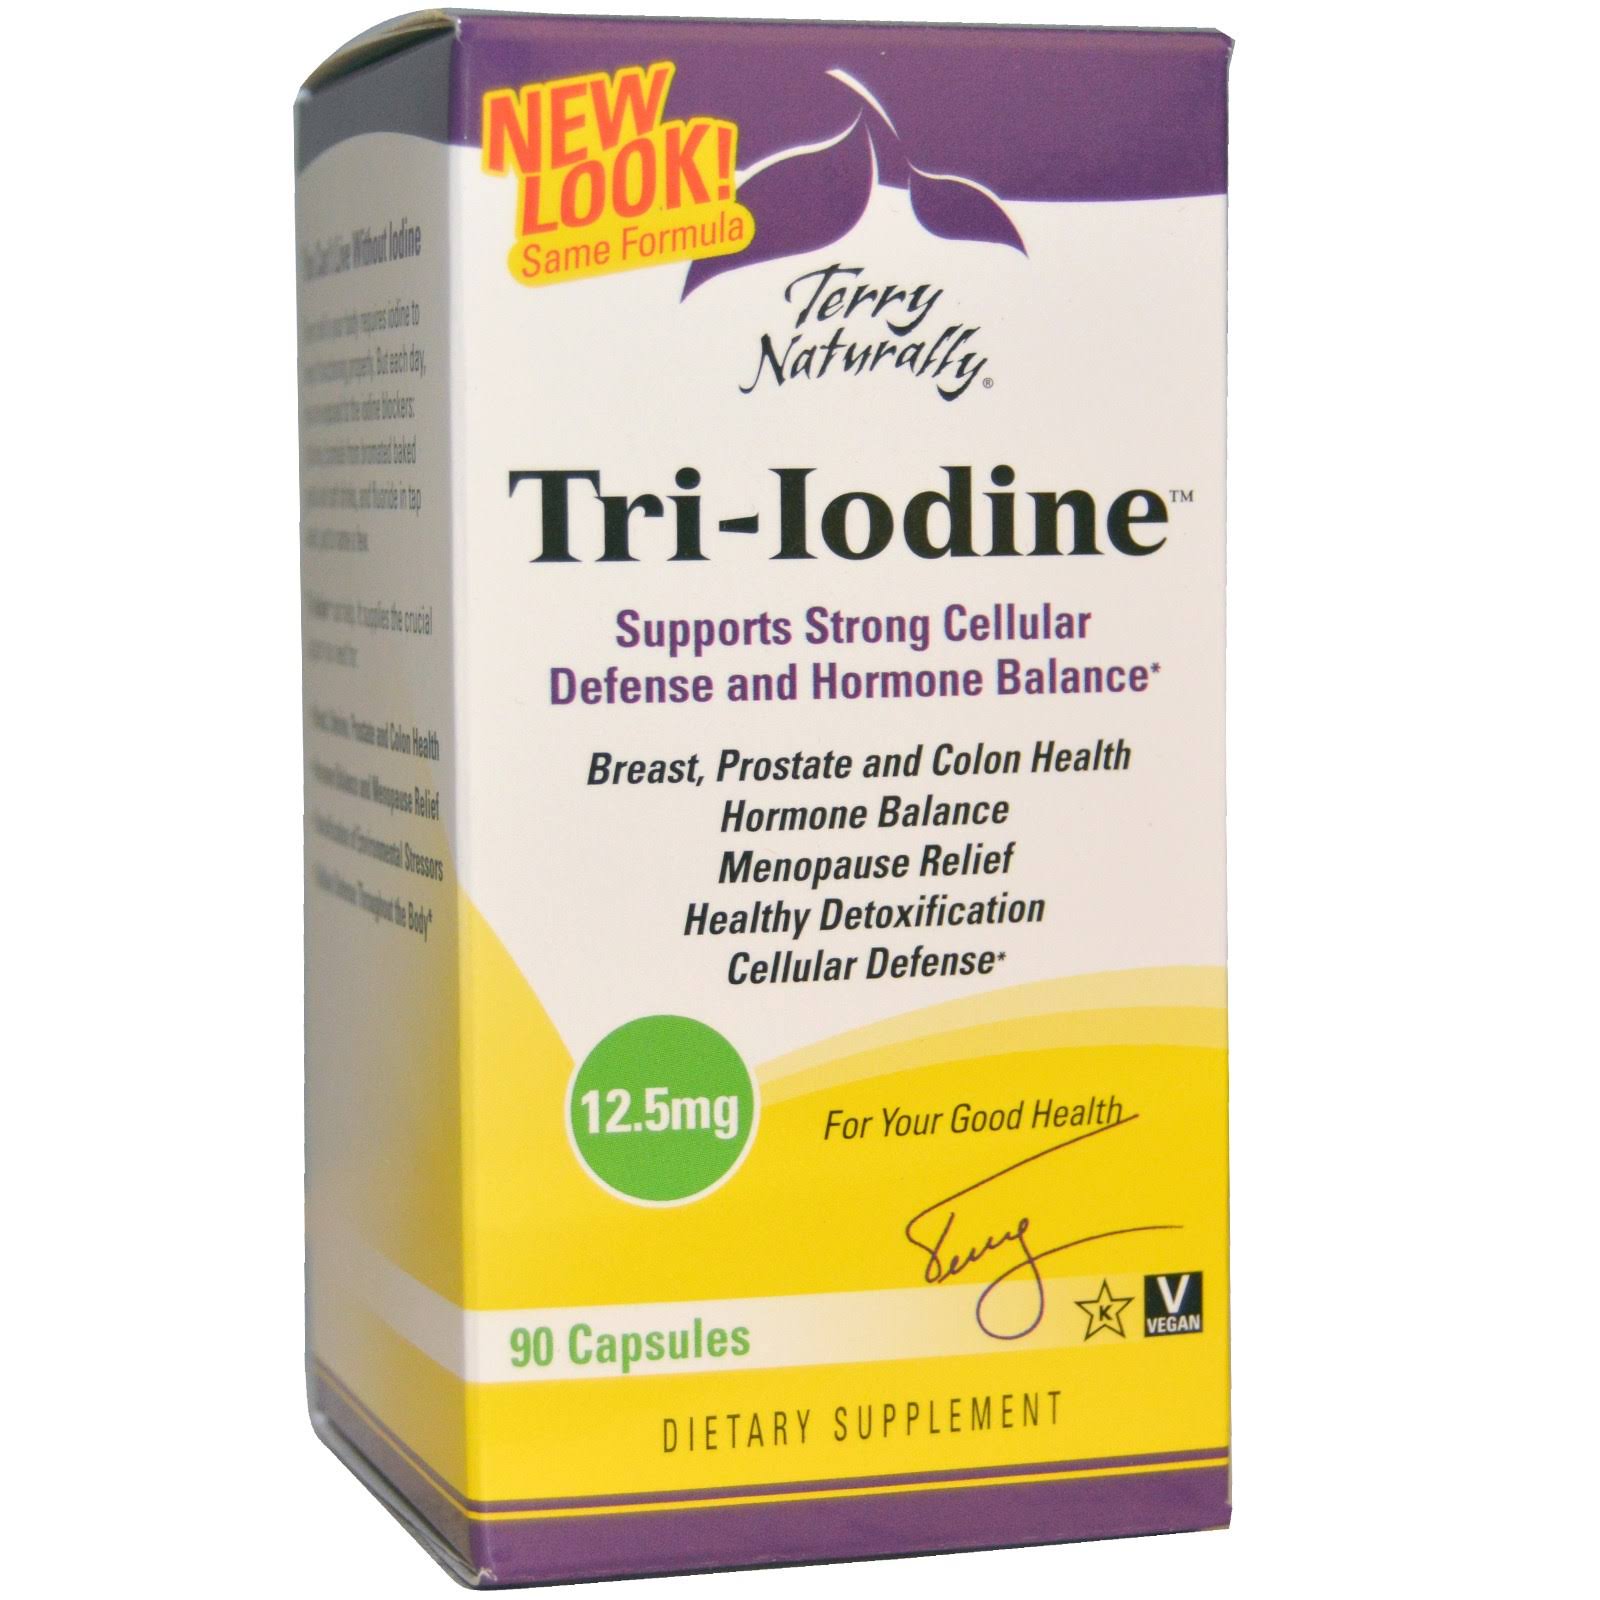 Terry Naturally Tri-Iodine Dietary Supplement - 90 Capsules